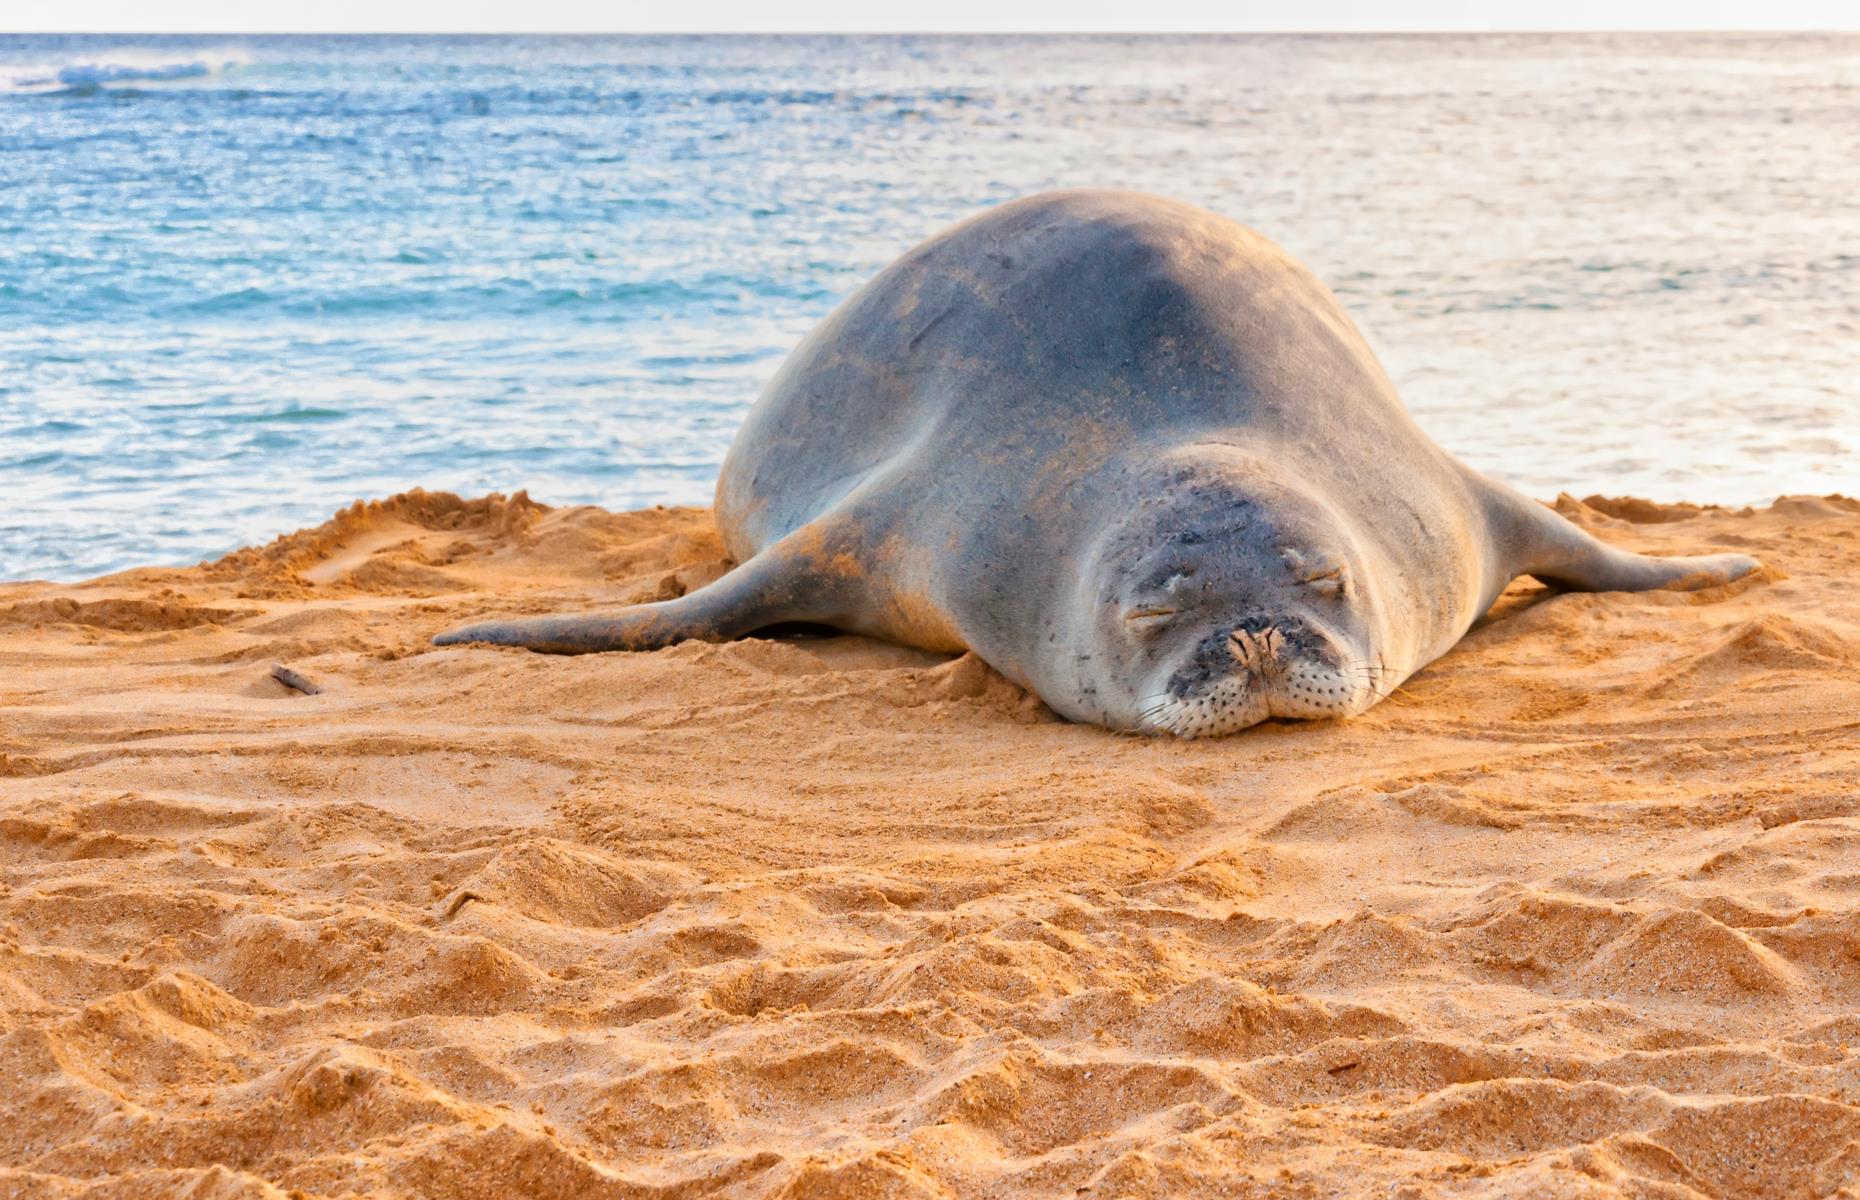 <p>The Hawaiian monk seal is another star of the islands' wildlife, though sadly the species is critically endangered. Endemic to the archipelago, these fascinating creatures favor Hawaii's northern islands, frolicking in the warm waters but coming on land to rest. Here a weary seal basks on sandy Poipu Beach, which is also popular with human surfers and snorkelers.</p>  <p><a href="https://www.loveexploring.com/galleries/107827/adorable-animal-photos-that-will-make-you-smile?page=1"><strong>These adorable animal photos will make you smile</strong></a></p>